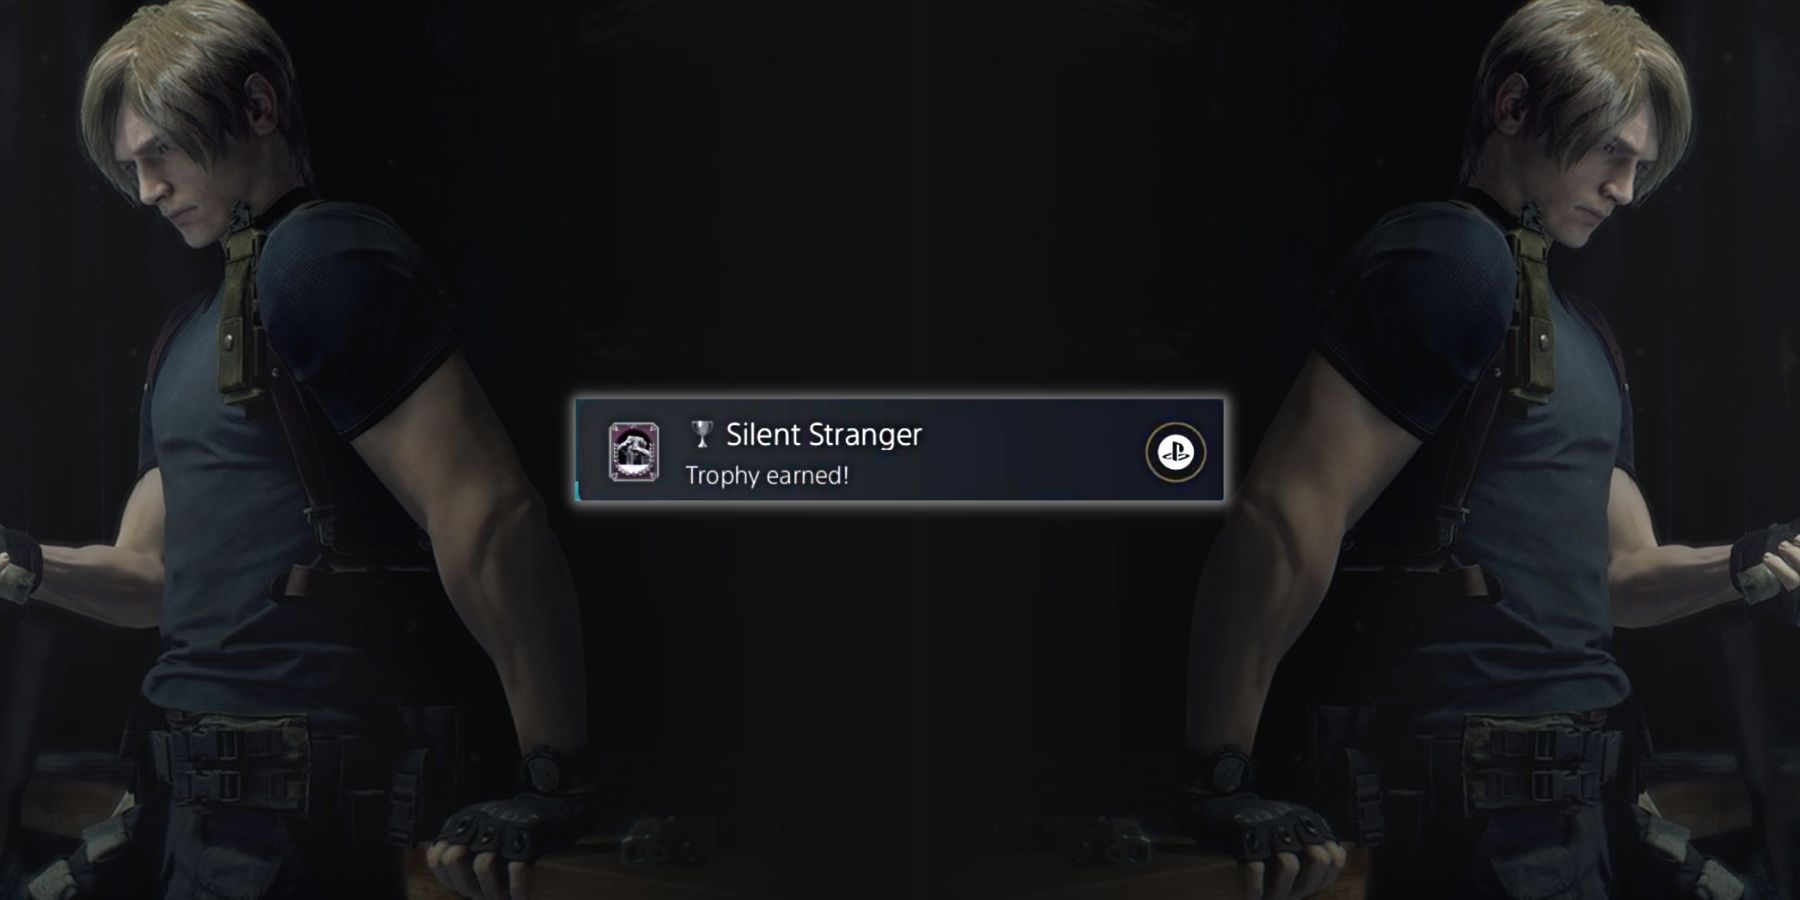 Tips for Getting the Silent Stranger Trophy/Achievement in RE4 Remake